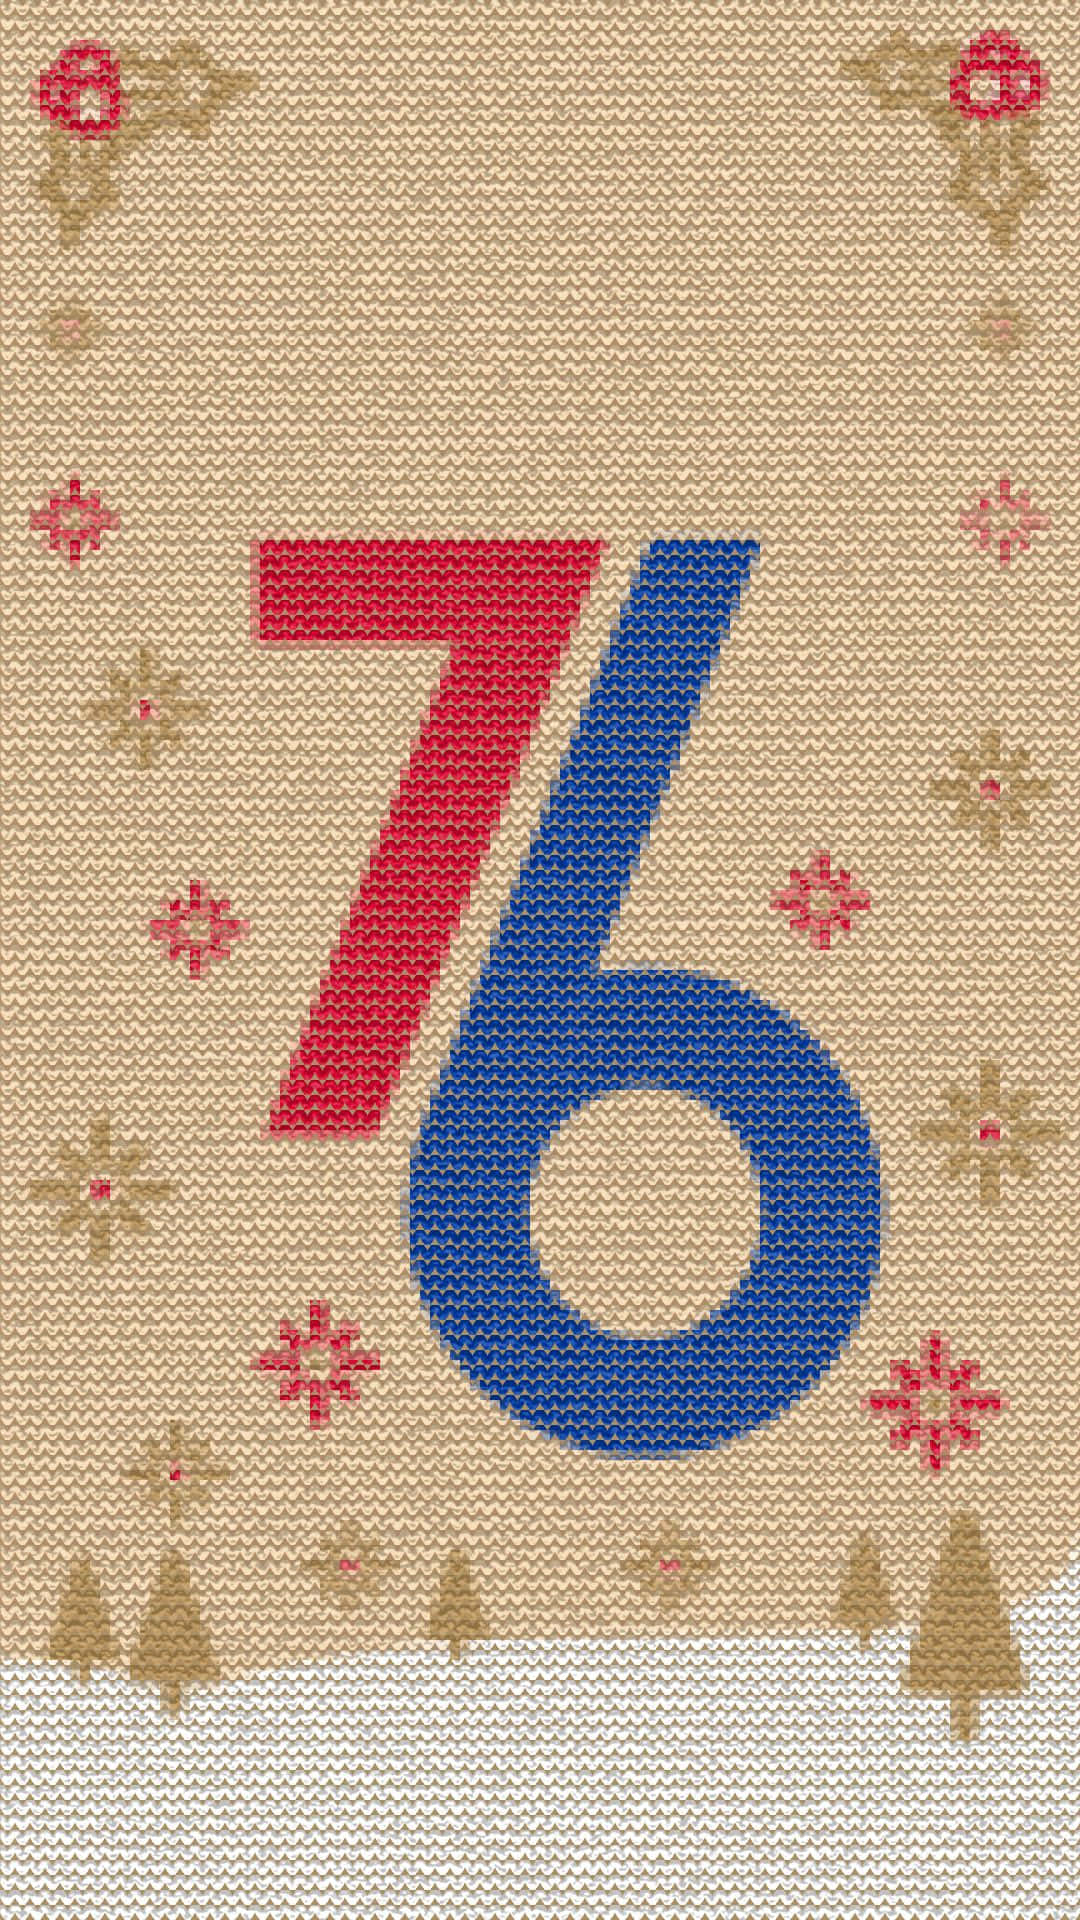 Unleash Your 76er Spirit on Your iPhone Wallpaper